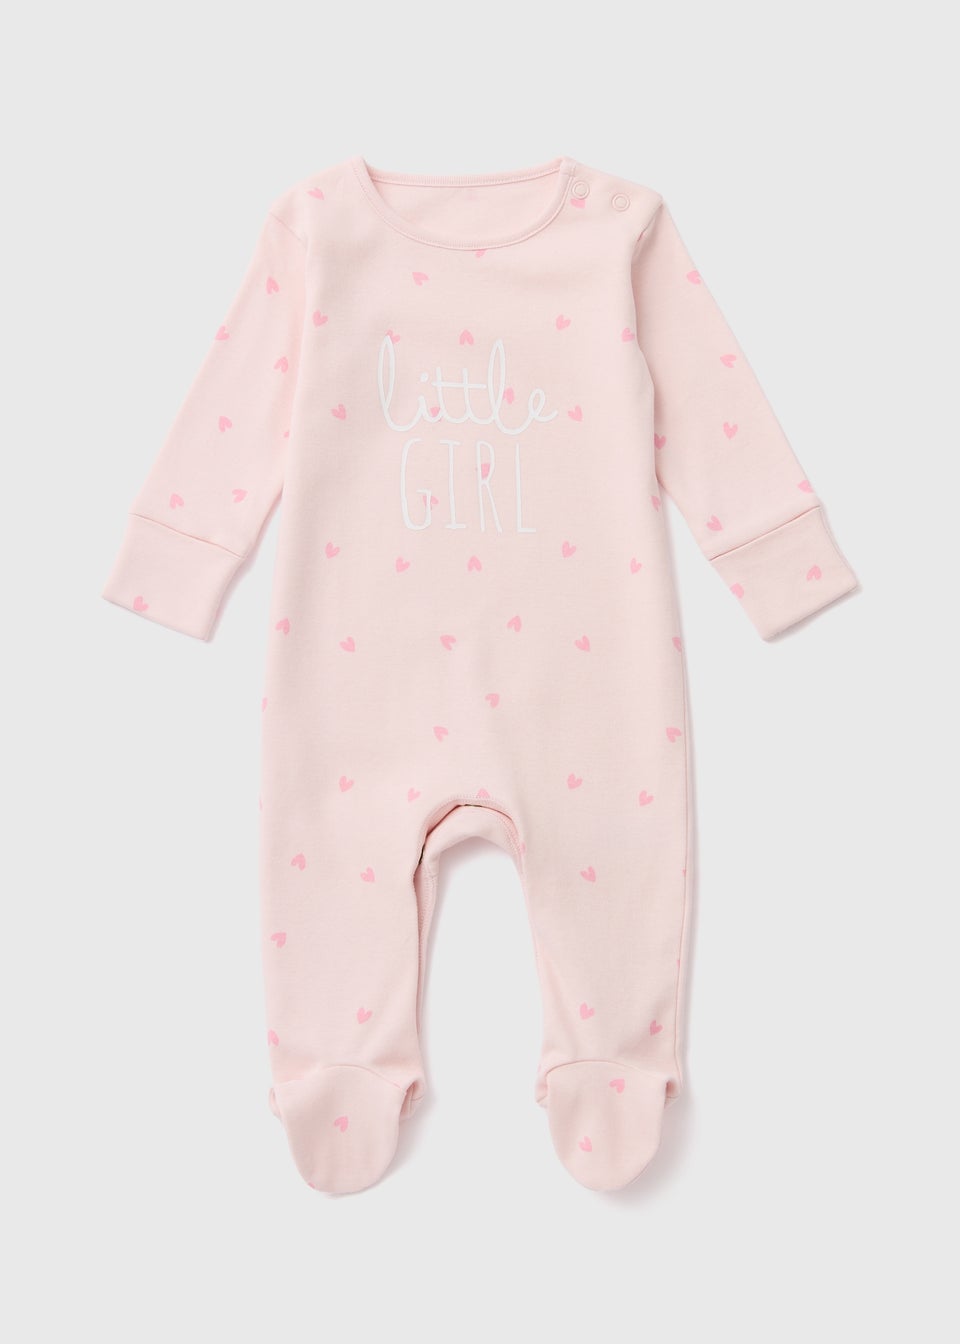 Baby Pink Little Girls Sleepsuit (Tiny Baby-18mths)